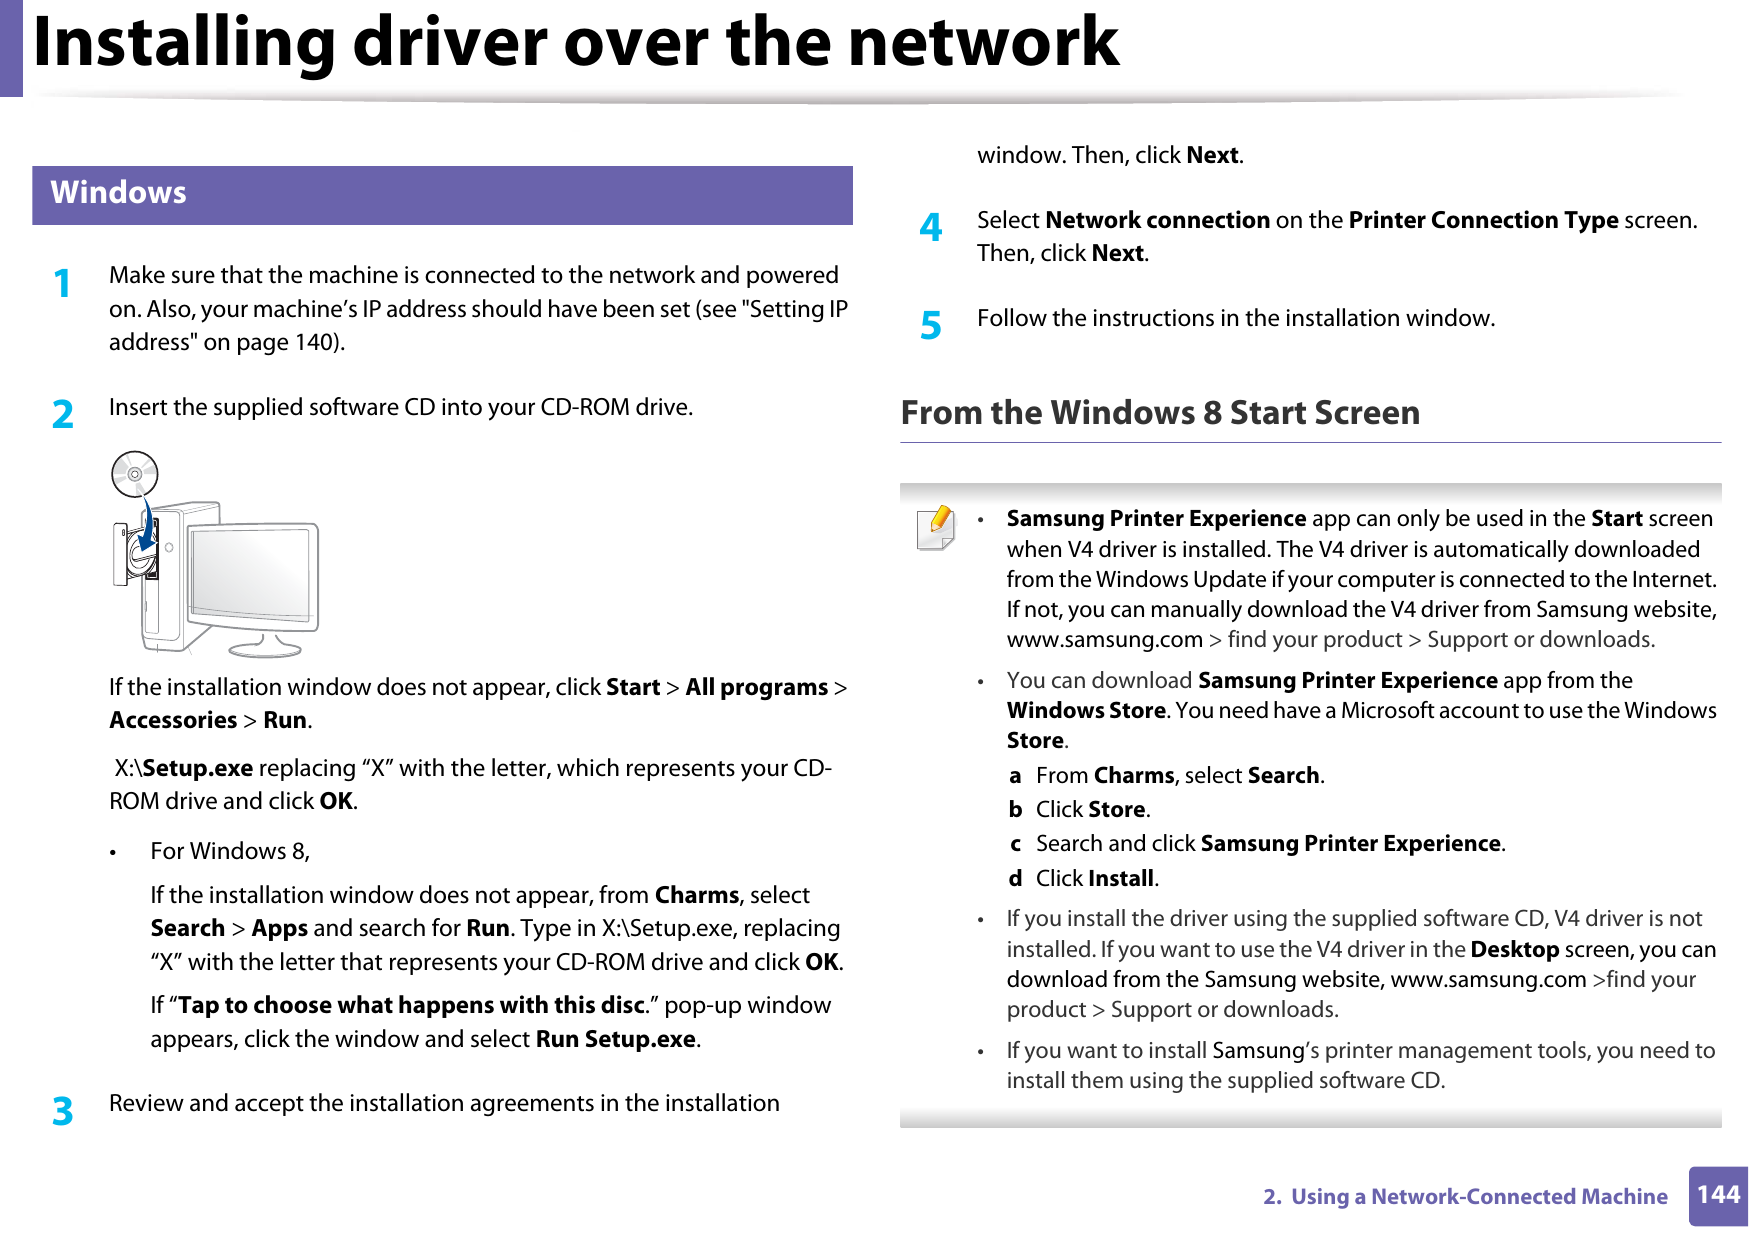 Installing driver over the network1442.  Using a Network-Connected Machine6 Windows1Make sure that the machine is connected to the network and powered on. Also, your machine’s IP address should have been set (see &quot;Setting IP address&quot; on page 140).2  Insert the supplied software CD into your CD-ROM drive.If the installation window does not appear, click Start &gt; All programs &gt; Accessories &gt; Run. X:\Setup.exe replacing “X” with the letter, which represents your CD-ROM drive and click OK.• For Windows 8,If the installation window does not appear, from Charms, select Search &gt; Apps and search for Run. Type in X:\Setup.exe, replacing “X” with the letter that represents your CD-ROM drive and click OK.If “Tap to choose what happens with this disc.” pop-up window appears, click the window and select Run Setup.exe.3  Review and accept the installation agreements in the installation window. Then, click Next.4  Select Network connection on the Printer Connection Type screen. Then, click Next.5  Follow the instructions in the installation window.From the Windows 8 Start Screen •Samsung Printer Experience app can only be used in the Start screen when V4 driver is installed. The V4 driver is automatically downloaded from the Windows Update if your computer is connected to the Internet. If not, you can manually download the V4 driver from Samsung website, www.samsung.com &gt; find your product &gt; Support or downloads. • You can download Samsung Printer Experience app from the Windows Store. You need have a Microsoft account to use the Windows Store.a  From Charms, select Search. b  Click Store.c  Search and click Samsung Printer Experience.d  Click Install.• If you install the driver using the supplied software CD, V4 driver is not installed. If you want to use the V4 driver in the Desktop screen, you can download from the Samsung website, www.samsung.com &gt;find your product &gt; Support or downloads.• If you want to install Samsung’s printer management tools, you need to install them using the supplied software CD. 